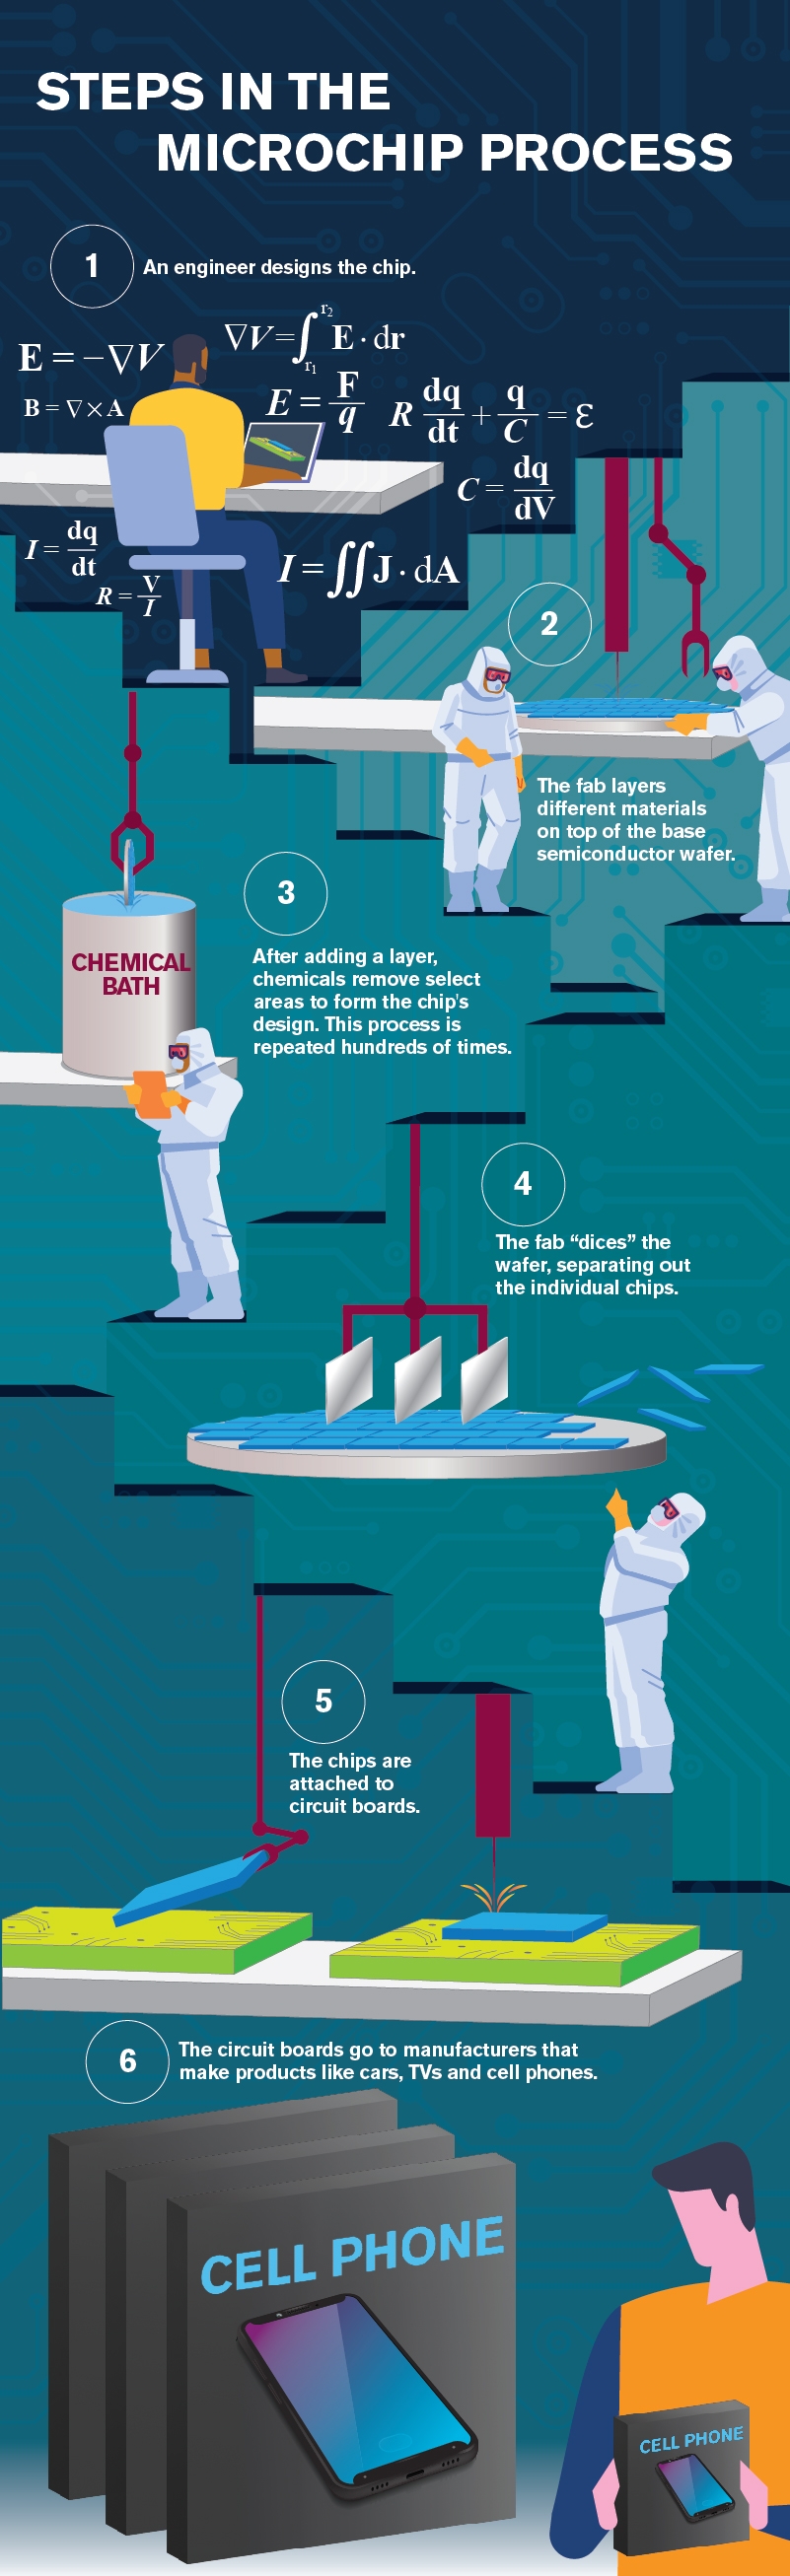 infographic of the microchip manufacturing process described above